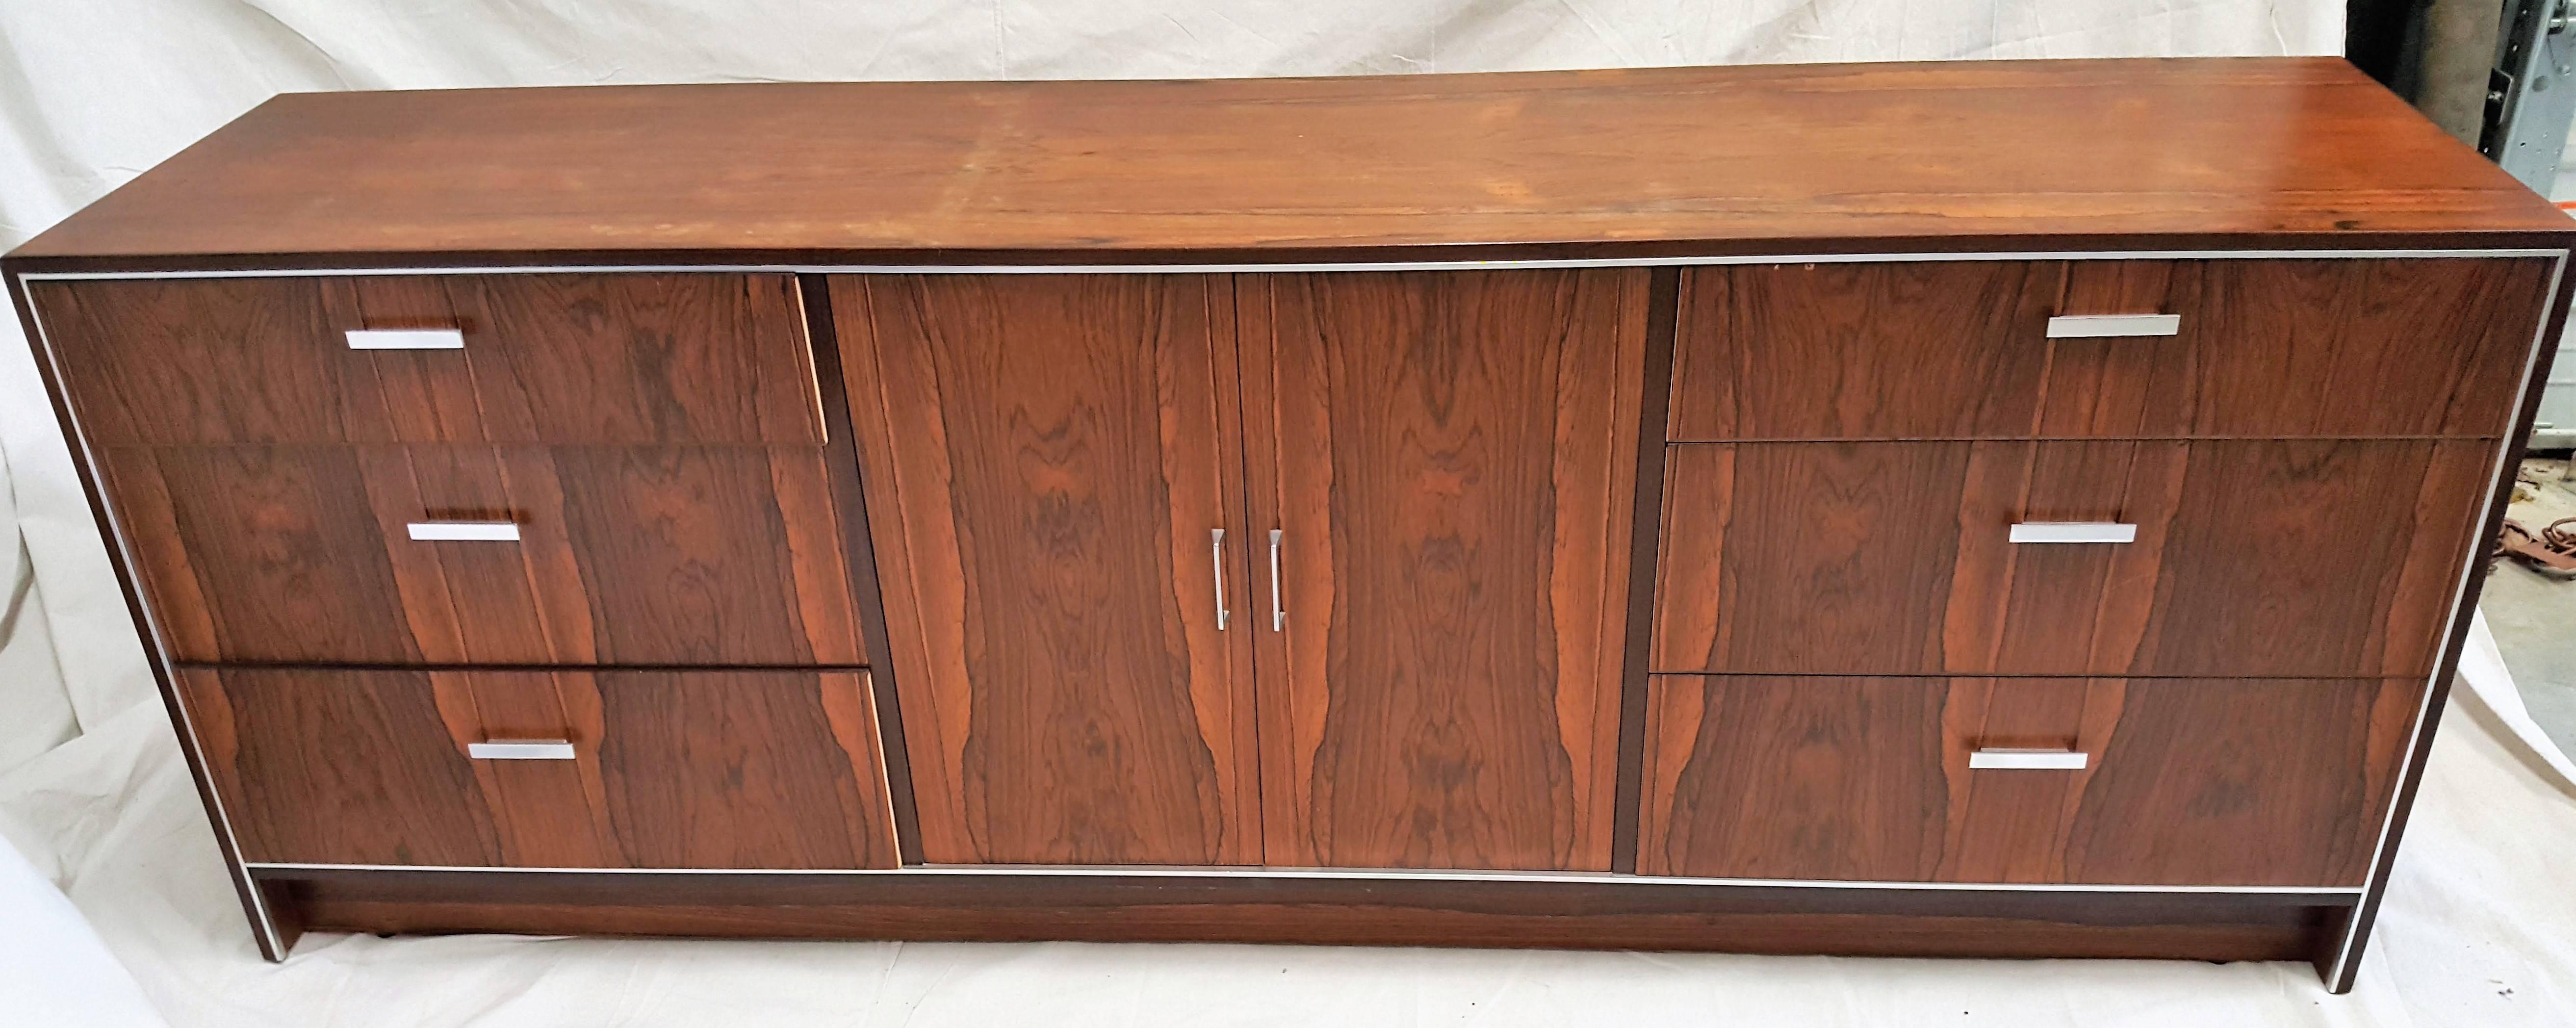 Beautiful rosewood Mid-Century dresser manufactured by Falster in Denmark. Notice the grain of the wood matches above and below. This lovely piece, which may be used as a bedroom dresser or console, has six drawers and closed two-door center, which